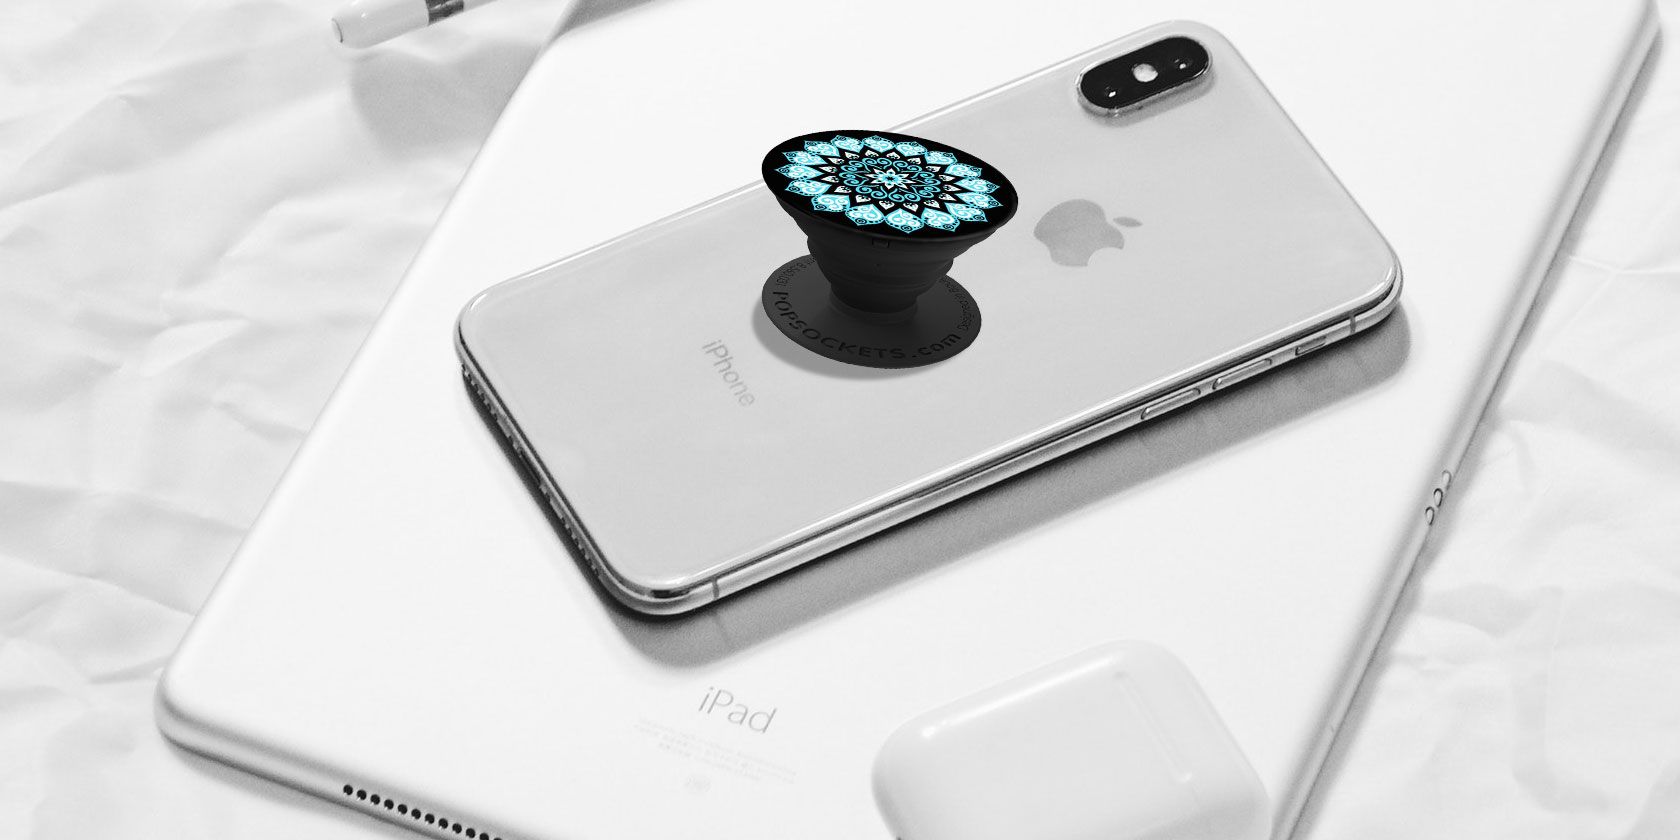 PopSockets Review: Practical iPhone Accessory or Goofy Distraction?